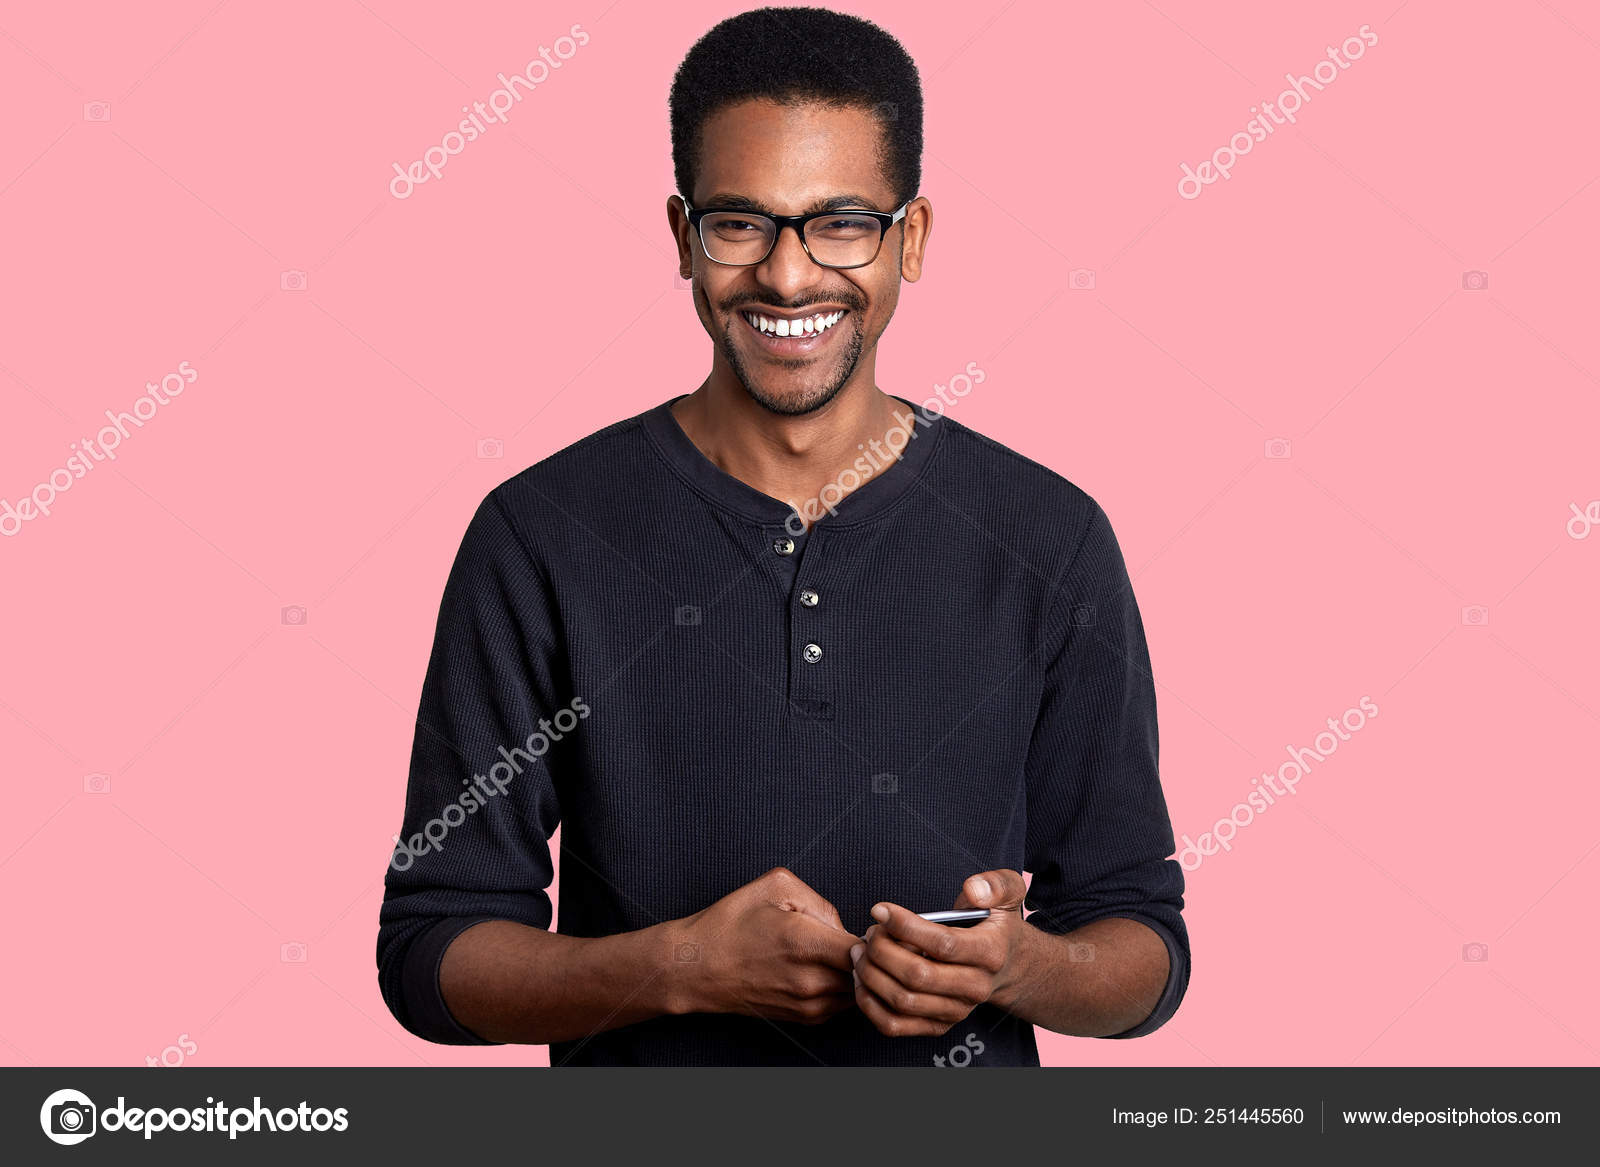 Handsome Young African American Man Holds Smart Phone And Looks At Camera With Smile Has Great News From Friend Dark Skinned Model Poses Against Pink Background People And Technology Concept Stock Photo